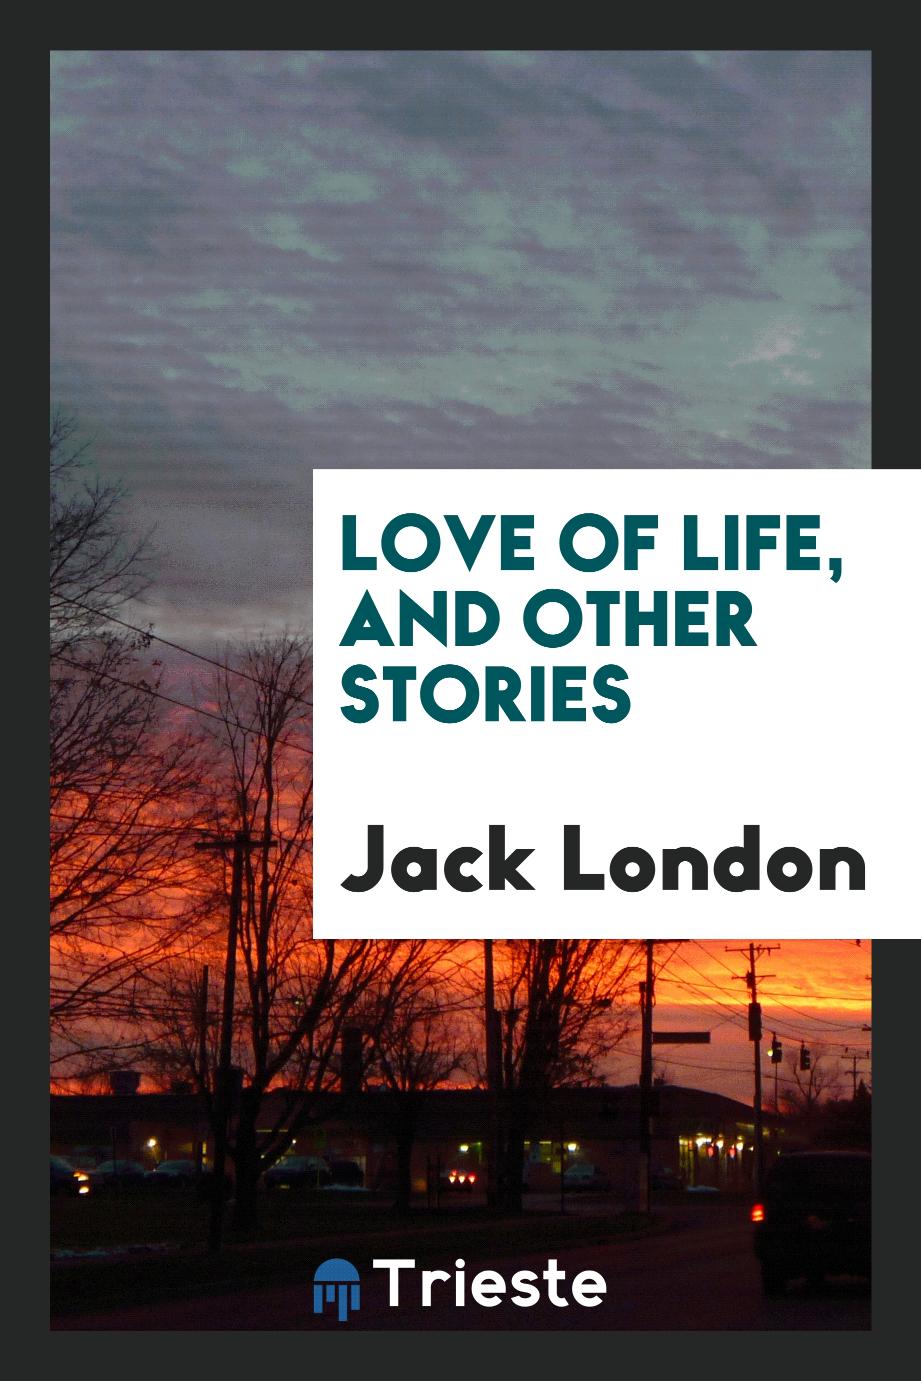 Love of life, and other stories